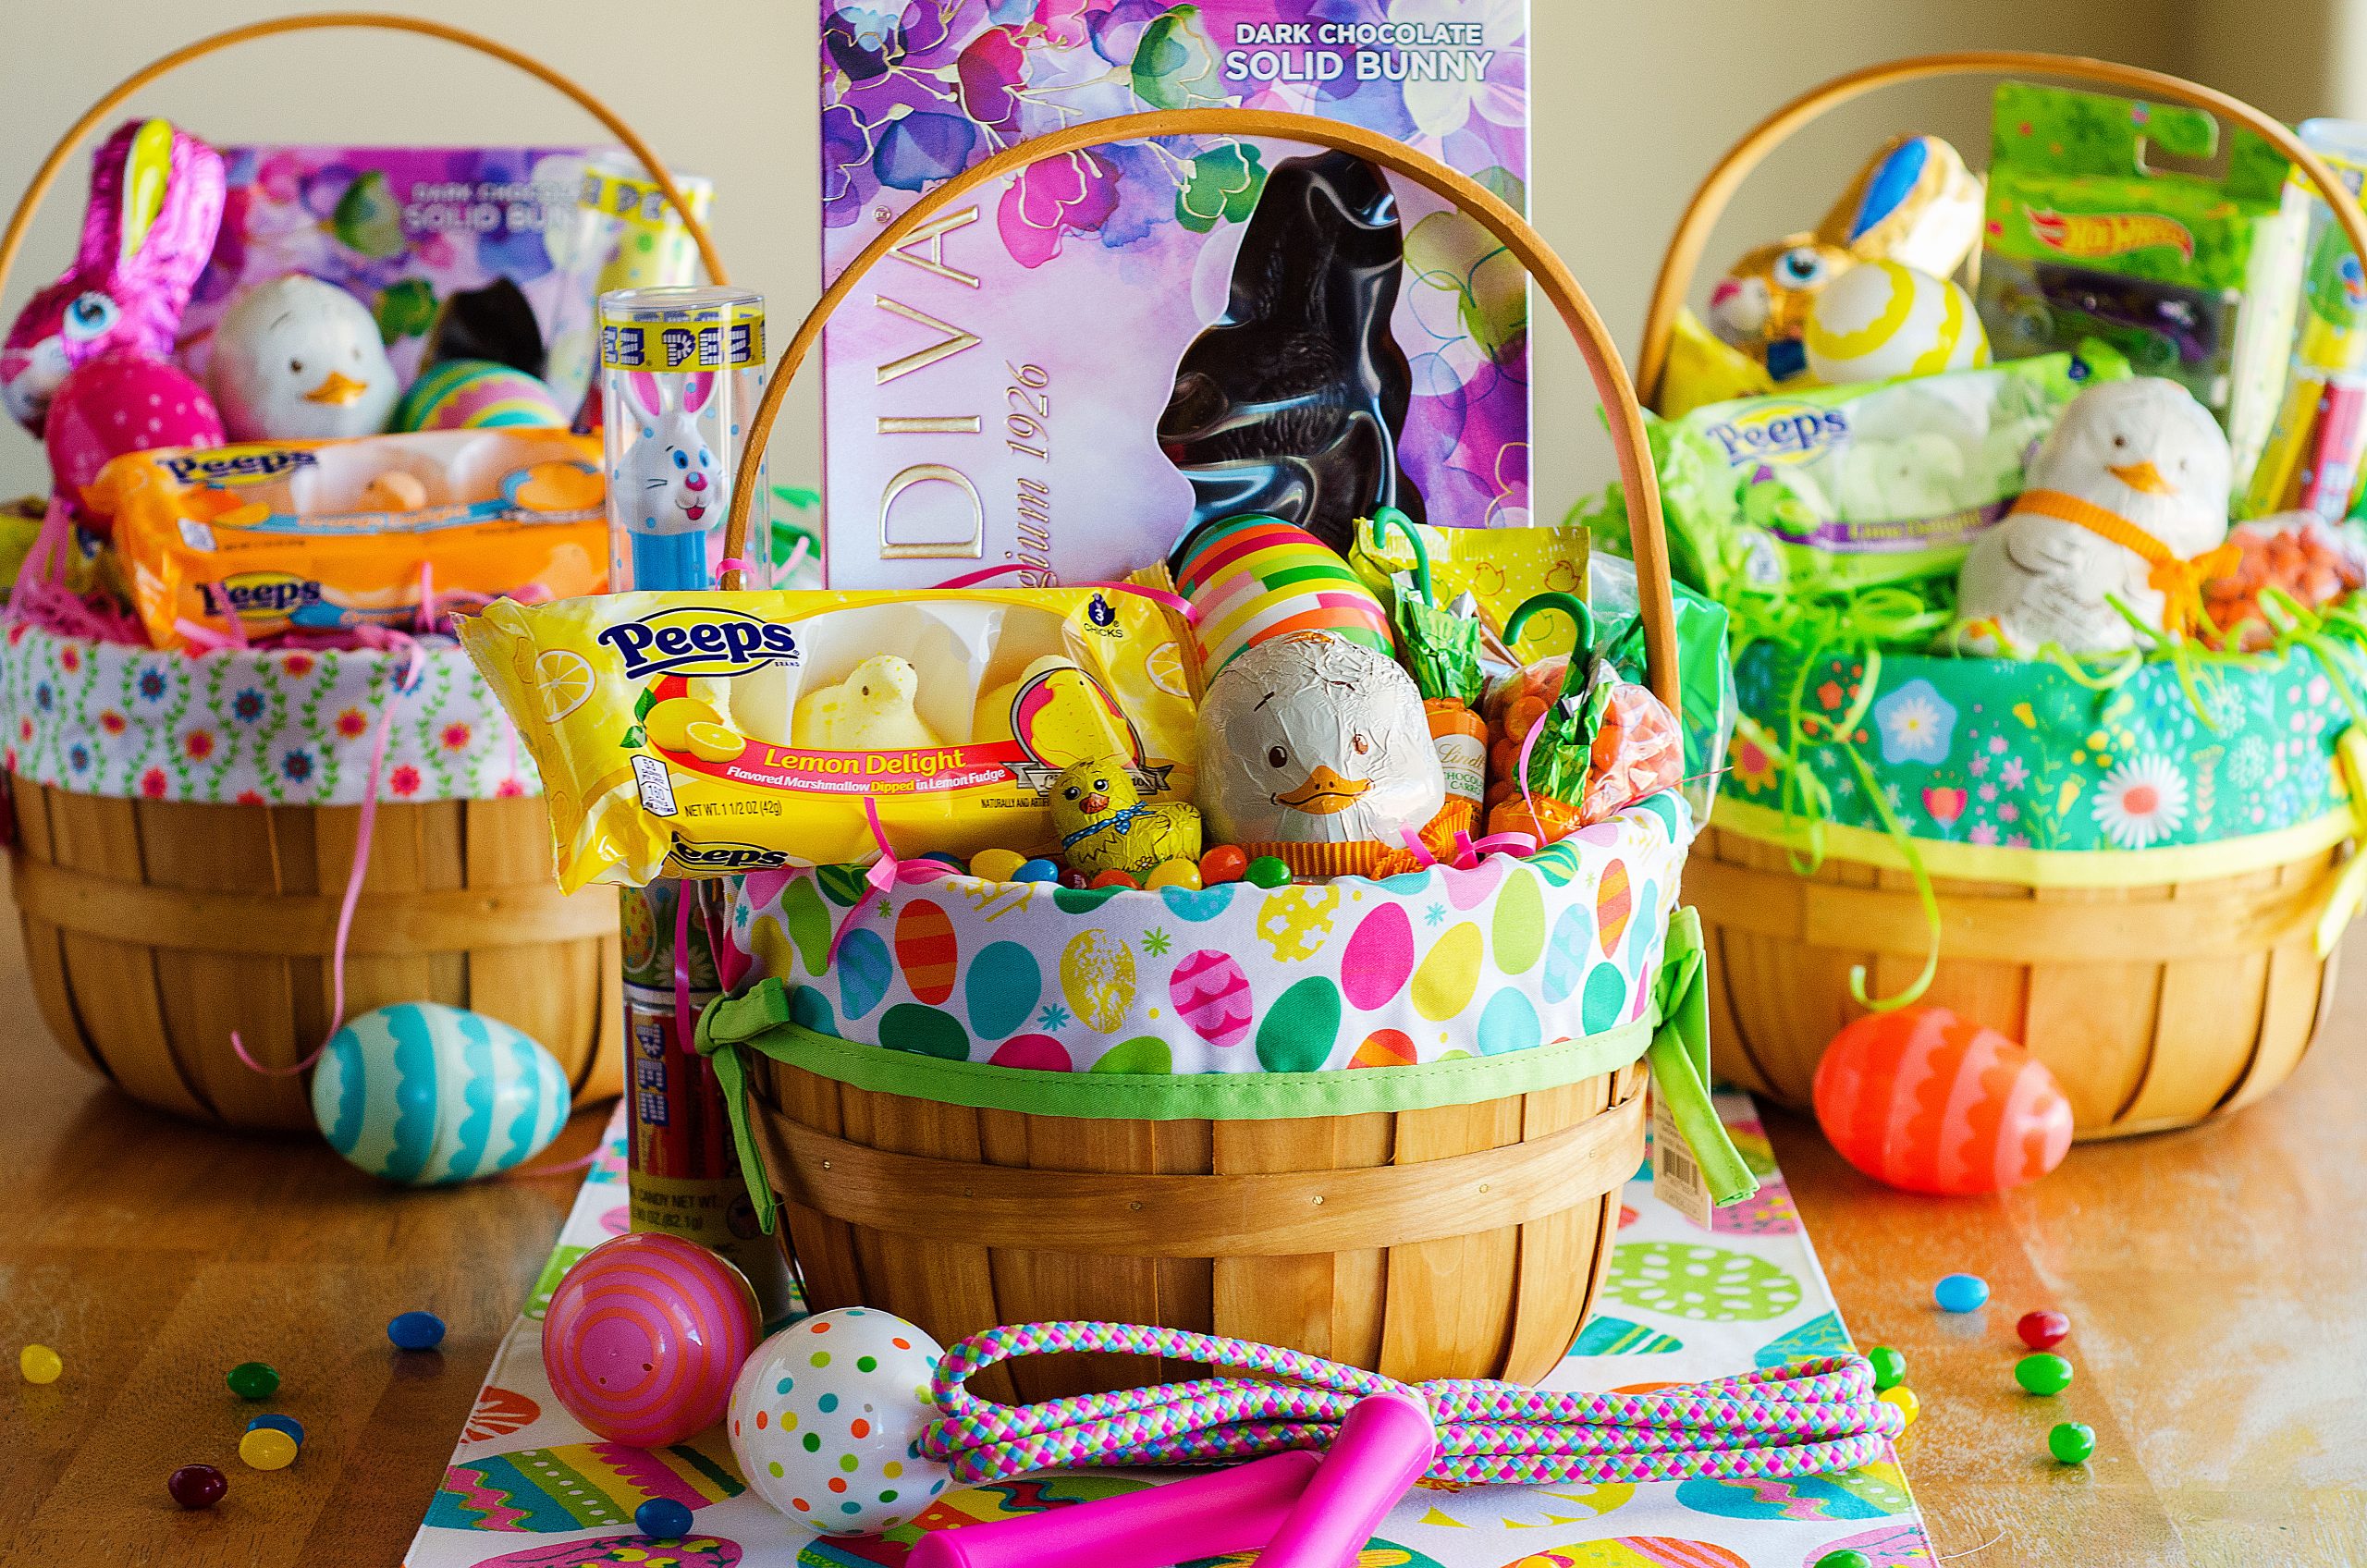 With God’s Grace needs Easter Baskets donations.